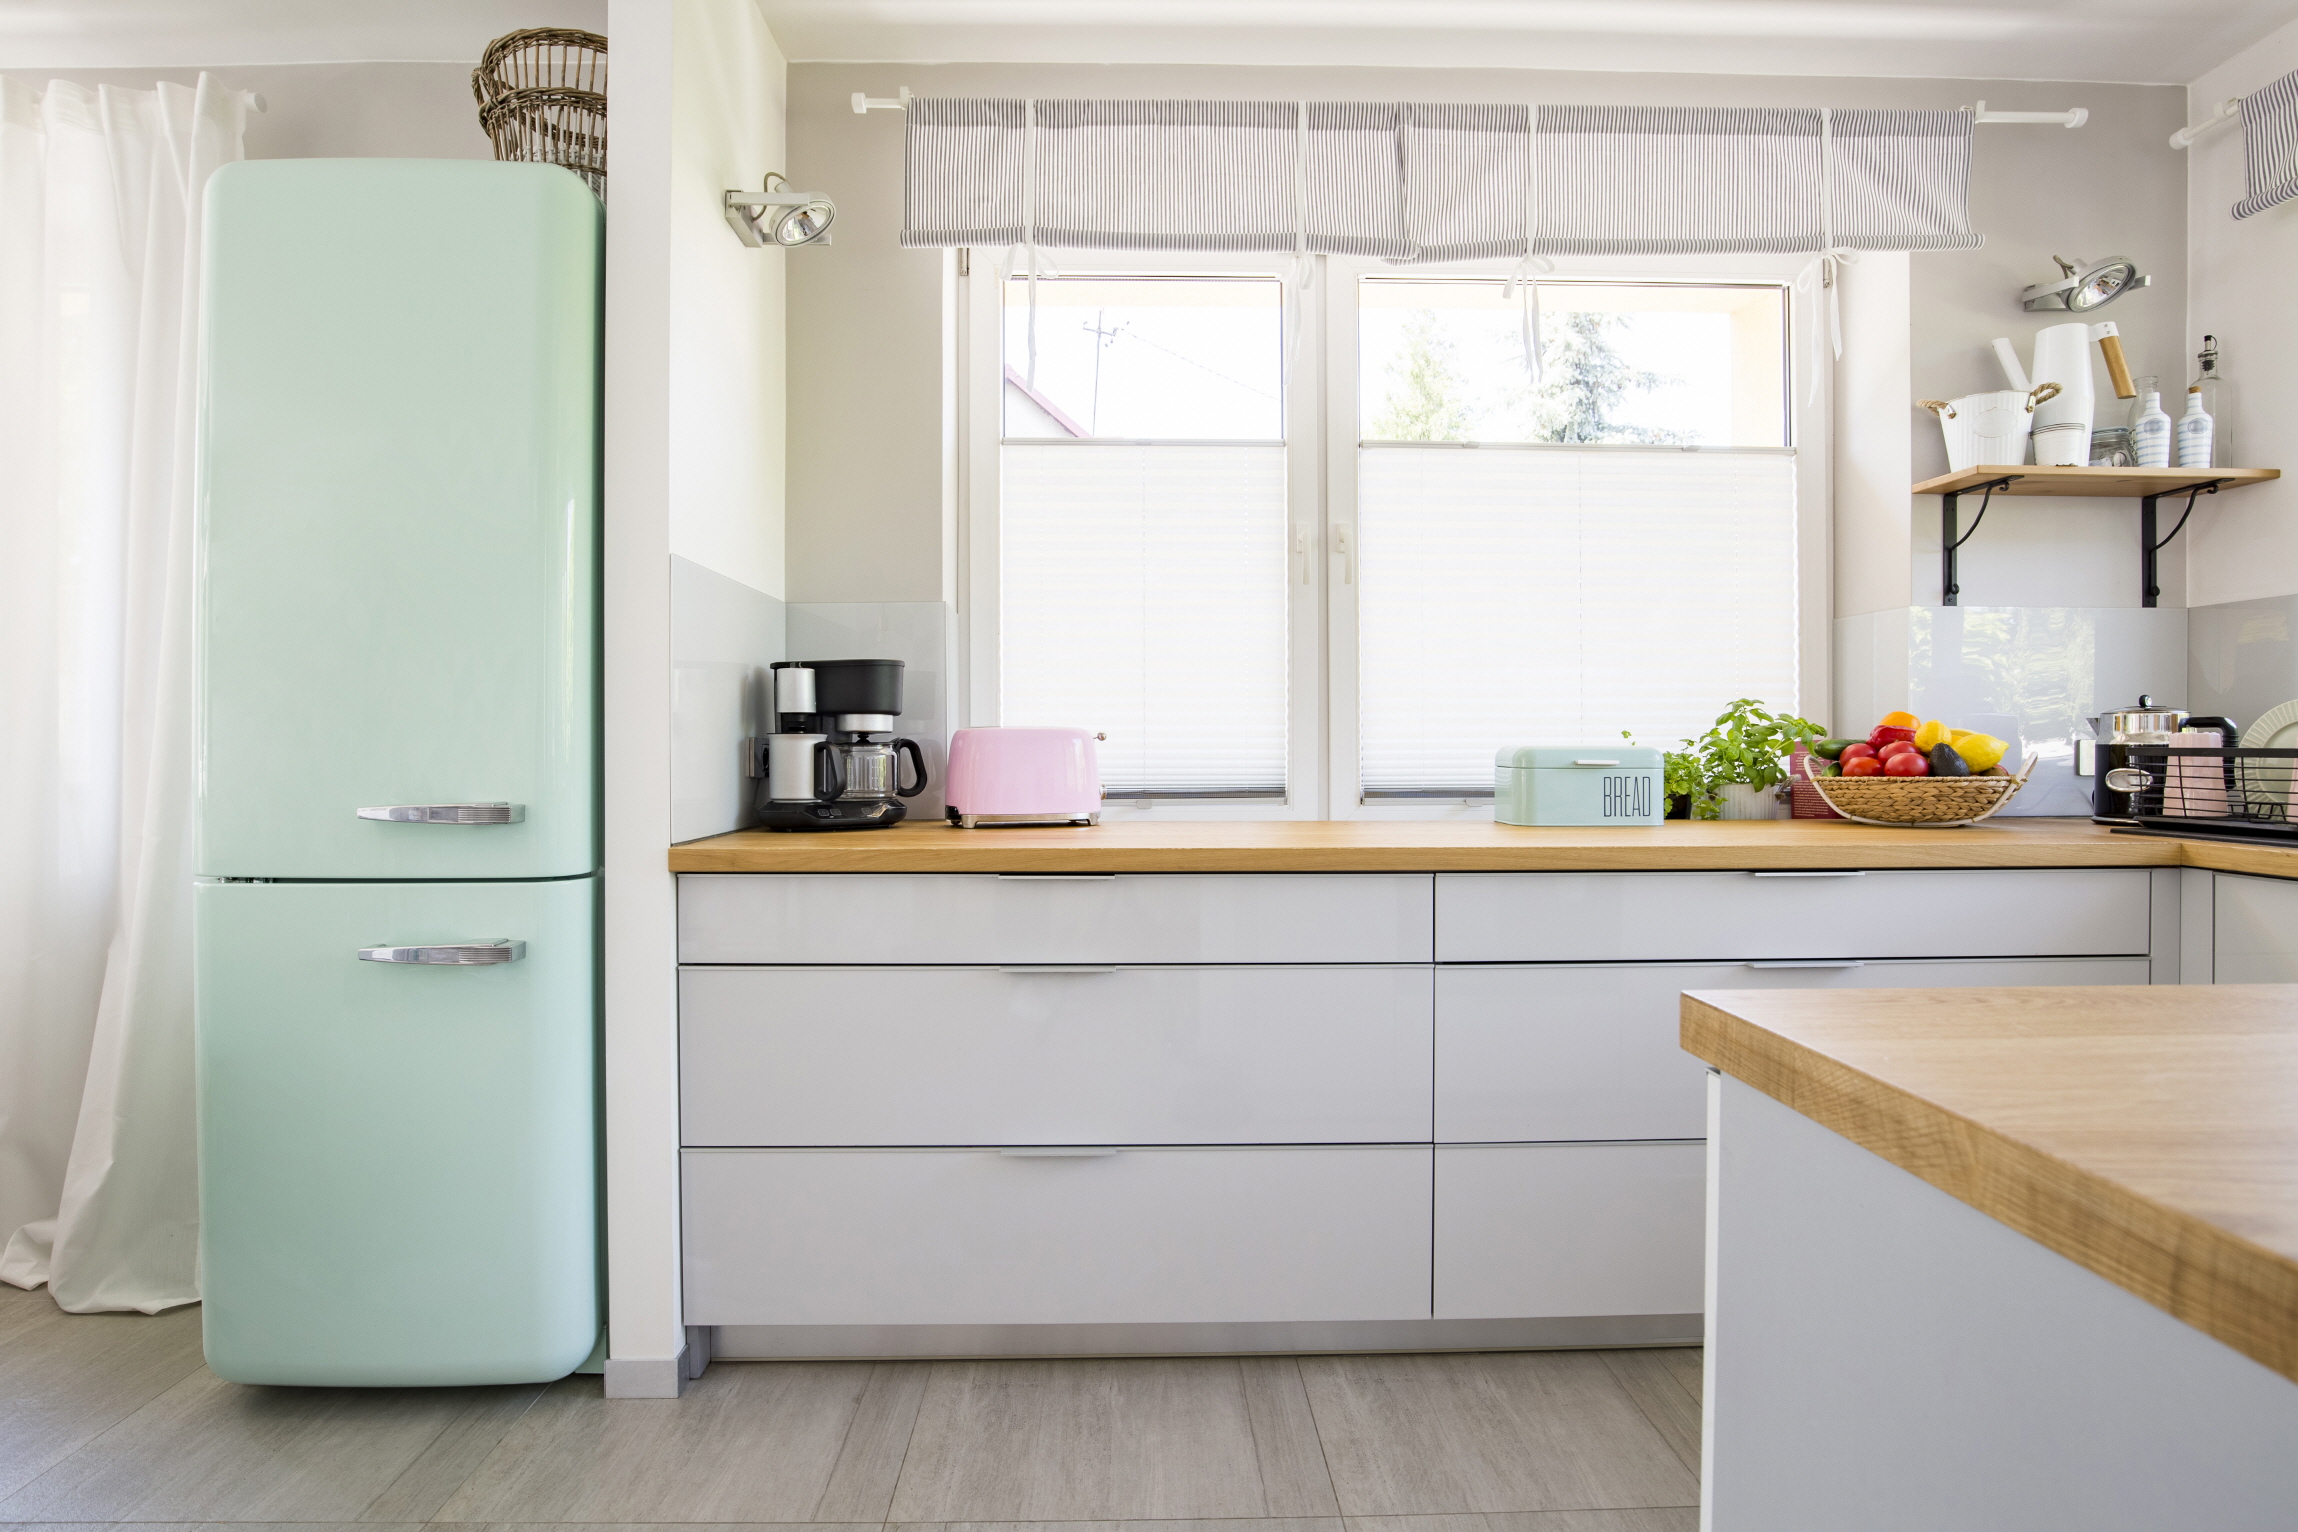 Elevate your small kitchen with colorful or retro-inspired appliances for a bold statement.